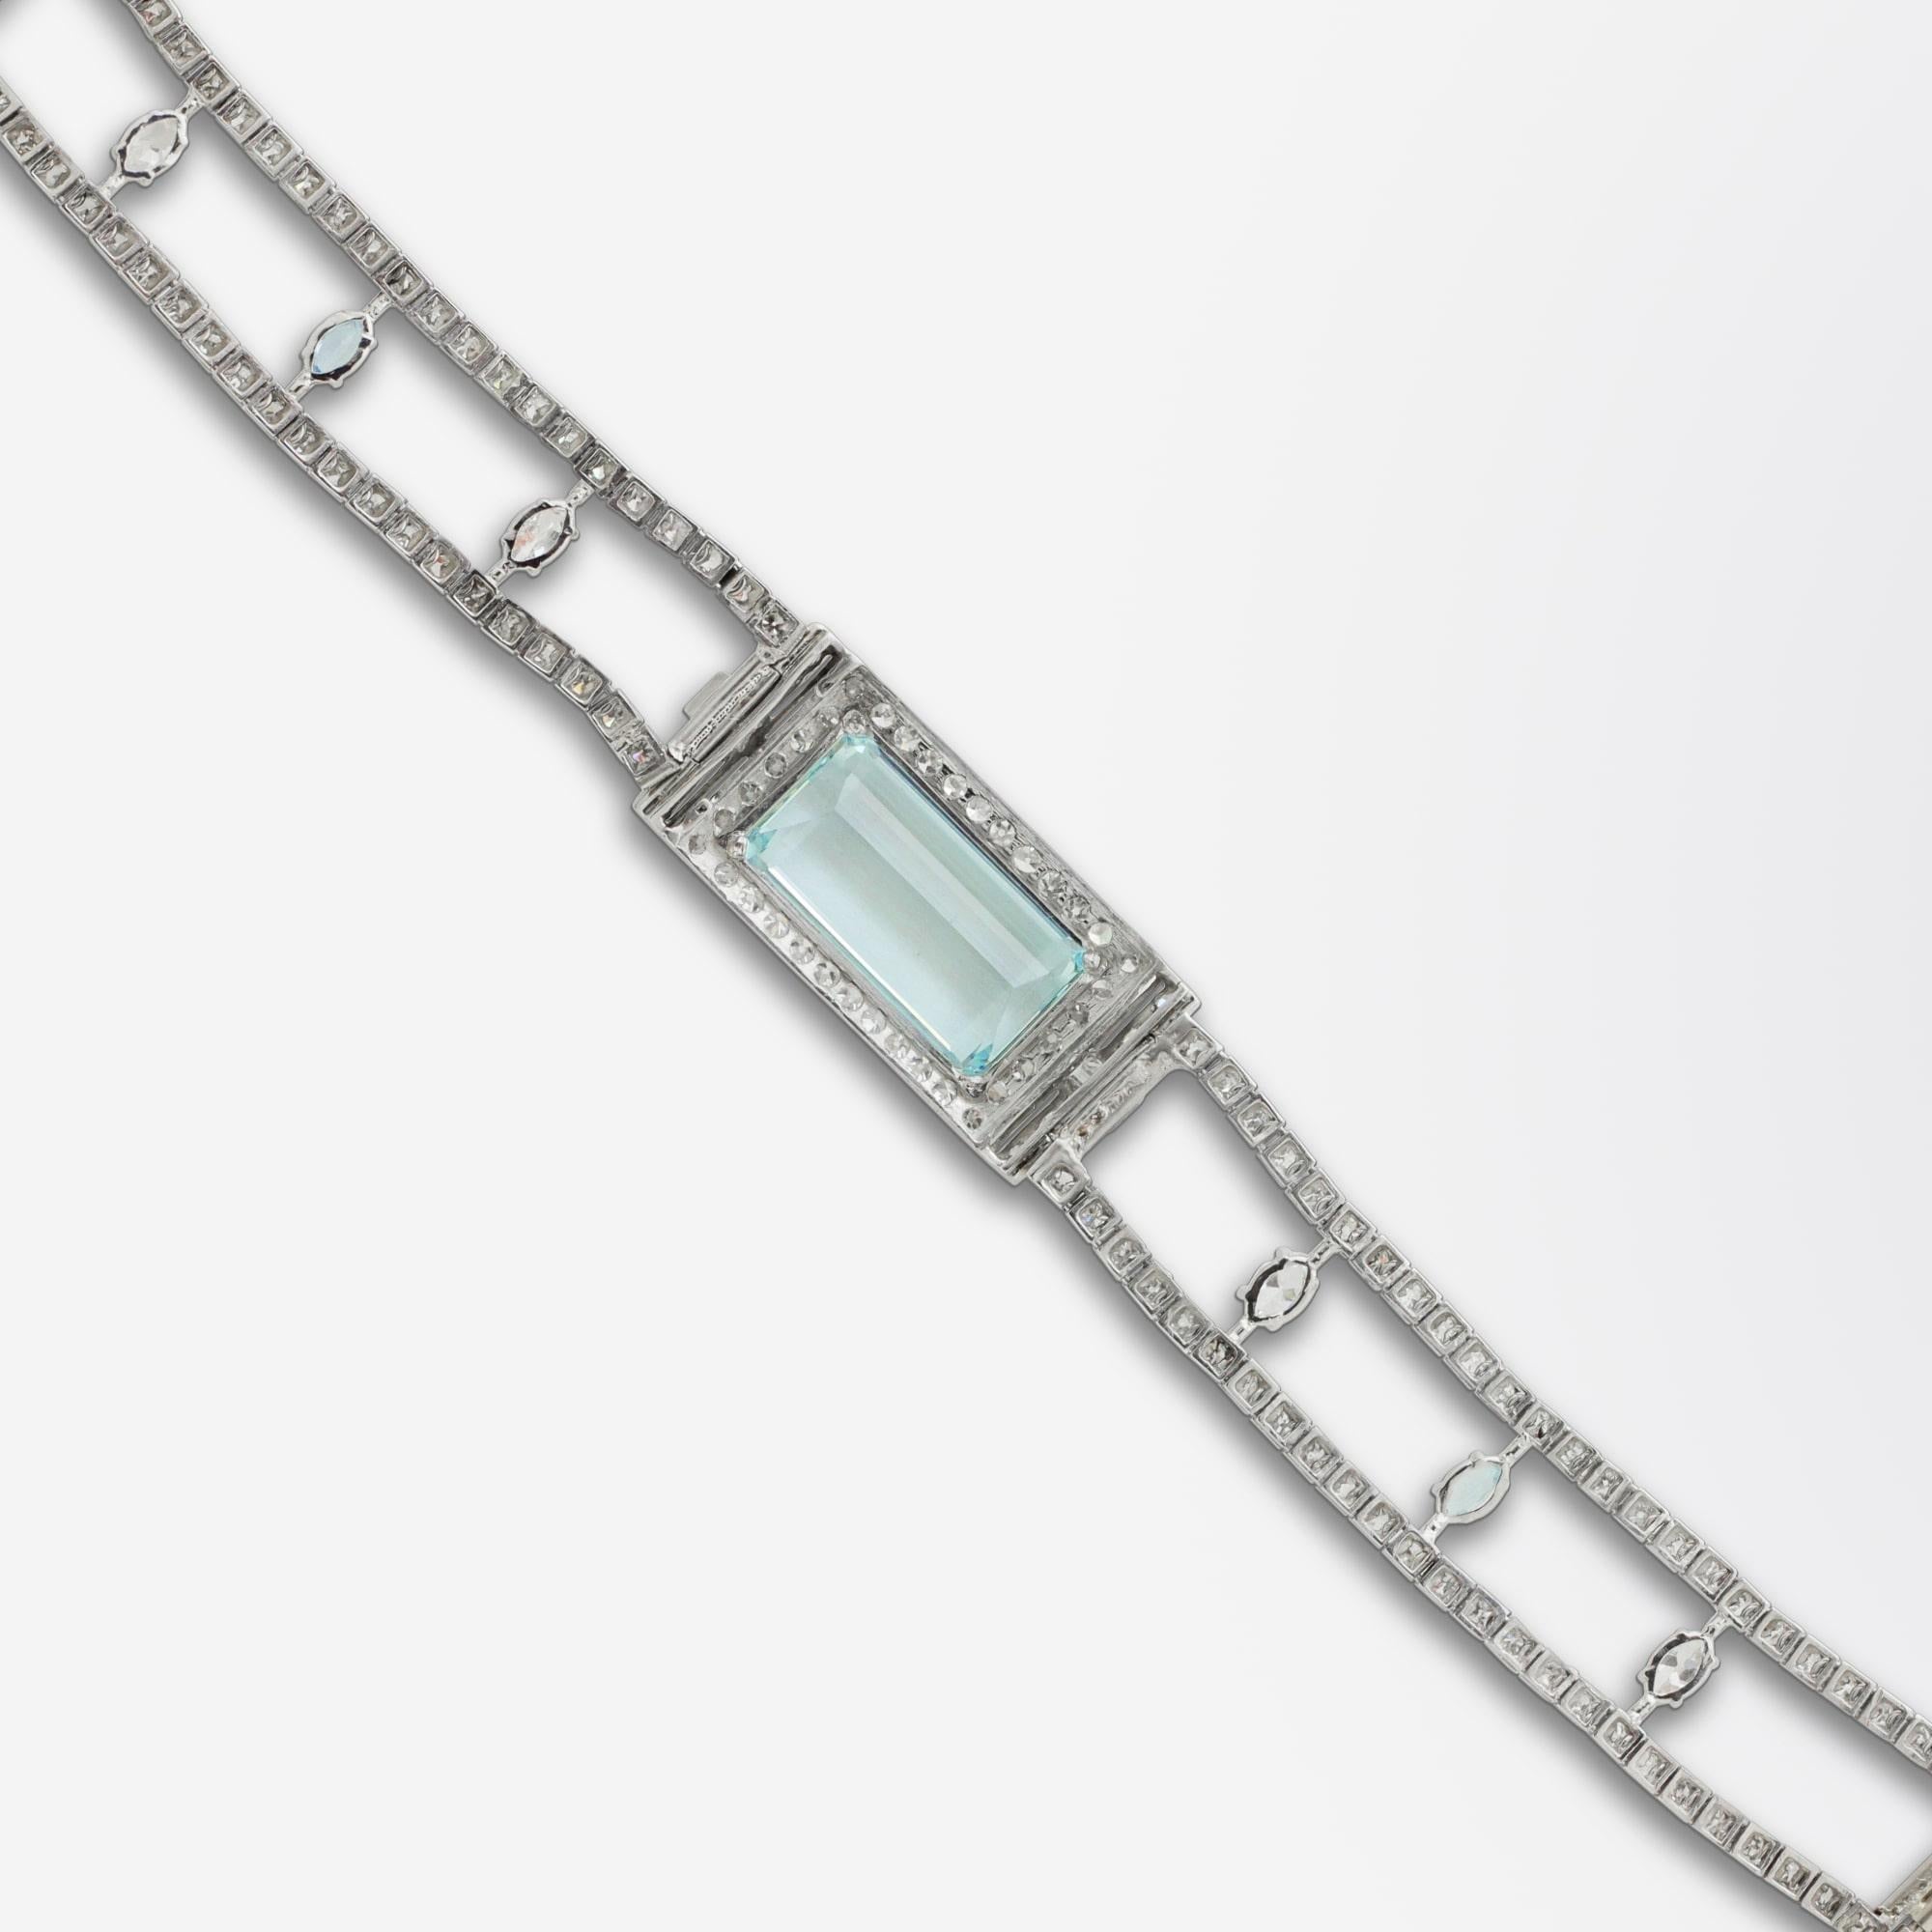 An incredible Art Deco diamond and aquamarine bracelet set in platinum. The central panel features an octagonal cut aquamarine set north south with a weight of 9.85 carat. This central stone has an accompanying GIA certification describing it as